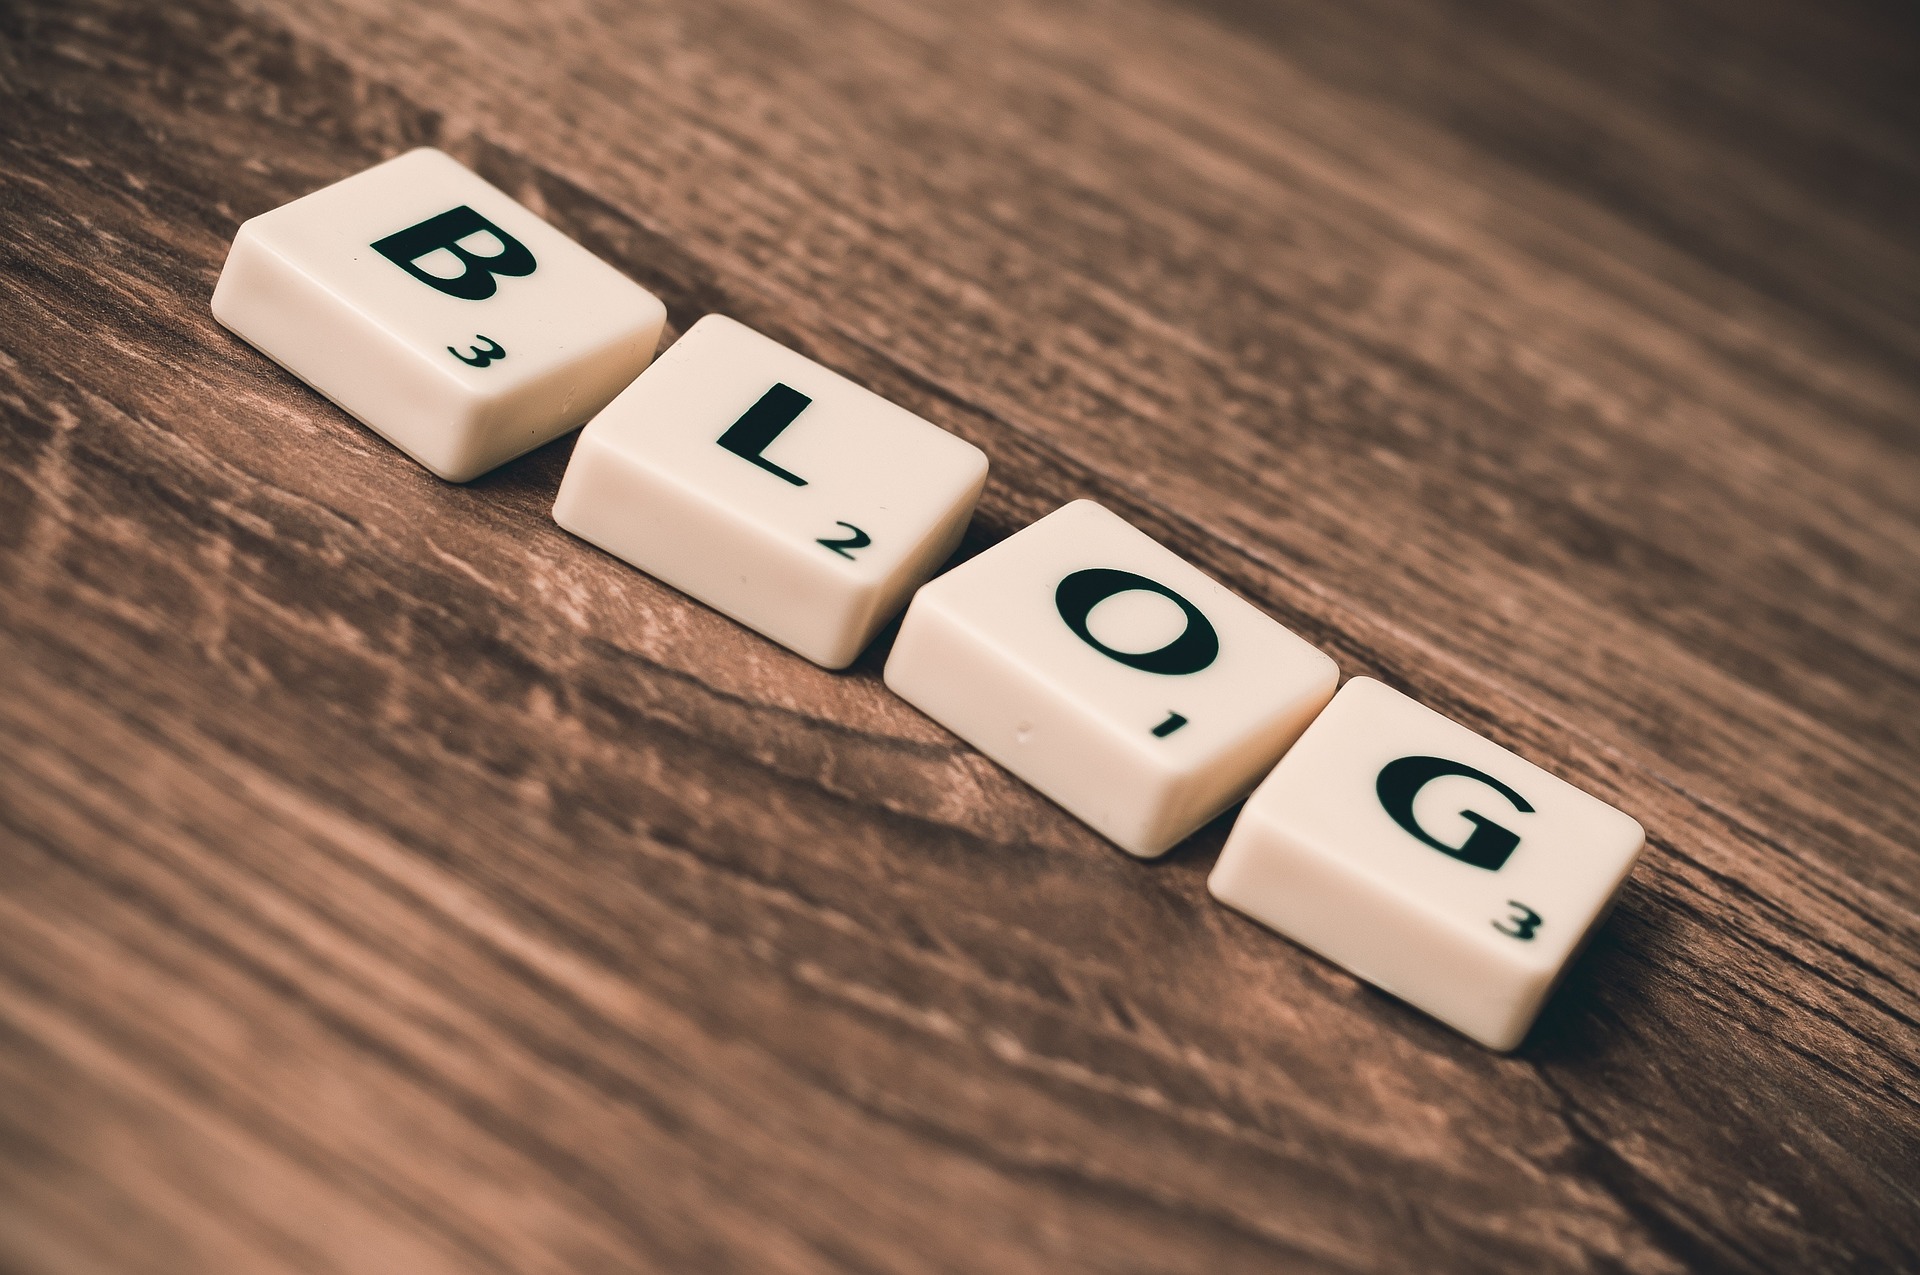 Blog Content Ideas For Business That Will Help You Gain Popularity